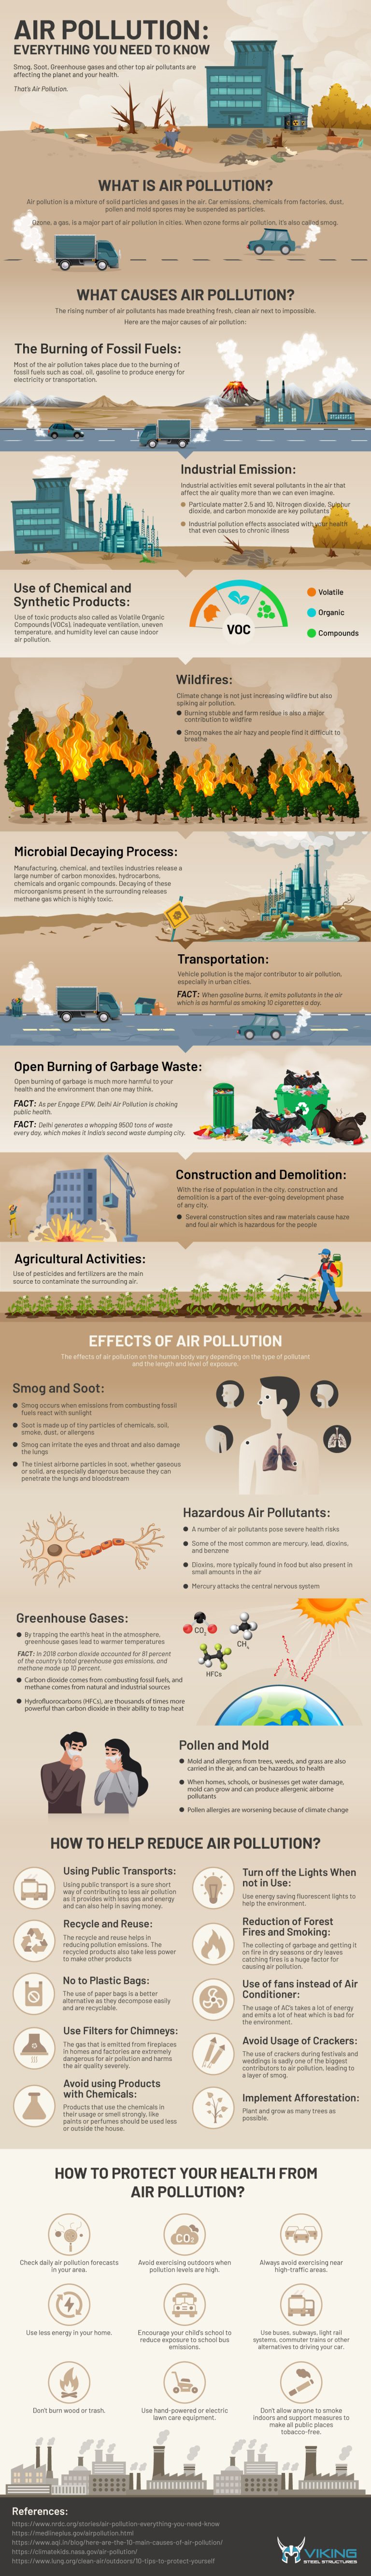 Air Pollution: Everything You Need to Know